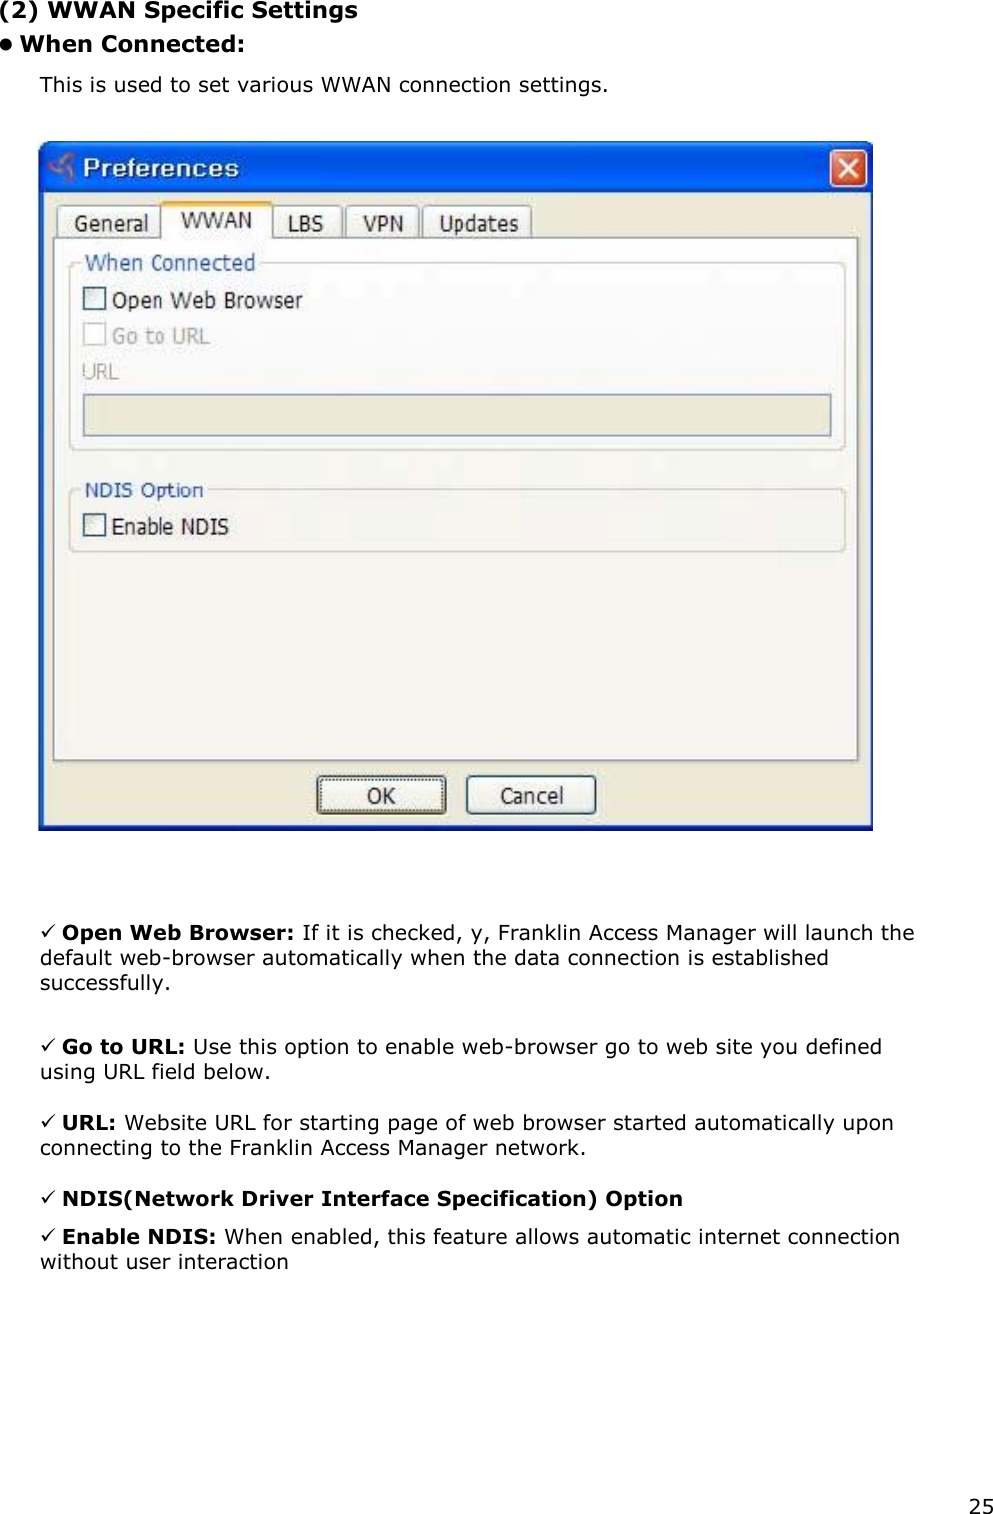 25    (2) WWAN Specific Settings    When Connected:    This is used to set various WWAN connection settings.      Open Web Browser: If it is checked, y, Franklin Access Manager will launch the default web-browser automatically when the data connection is established successfully.     Go to URL: Use this option to enable web-browser go to web site you defined using URL field below.     URL: Website URL for starting page of web browser started automatically upon connecting to the Franklin Access Manager network.     NDIS(Network Driver Interface Specification) Option     Enable NDIS: When enabled, this feature allows automatic internet connection without user interaction              